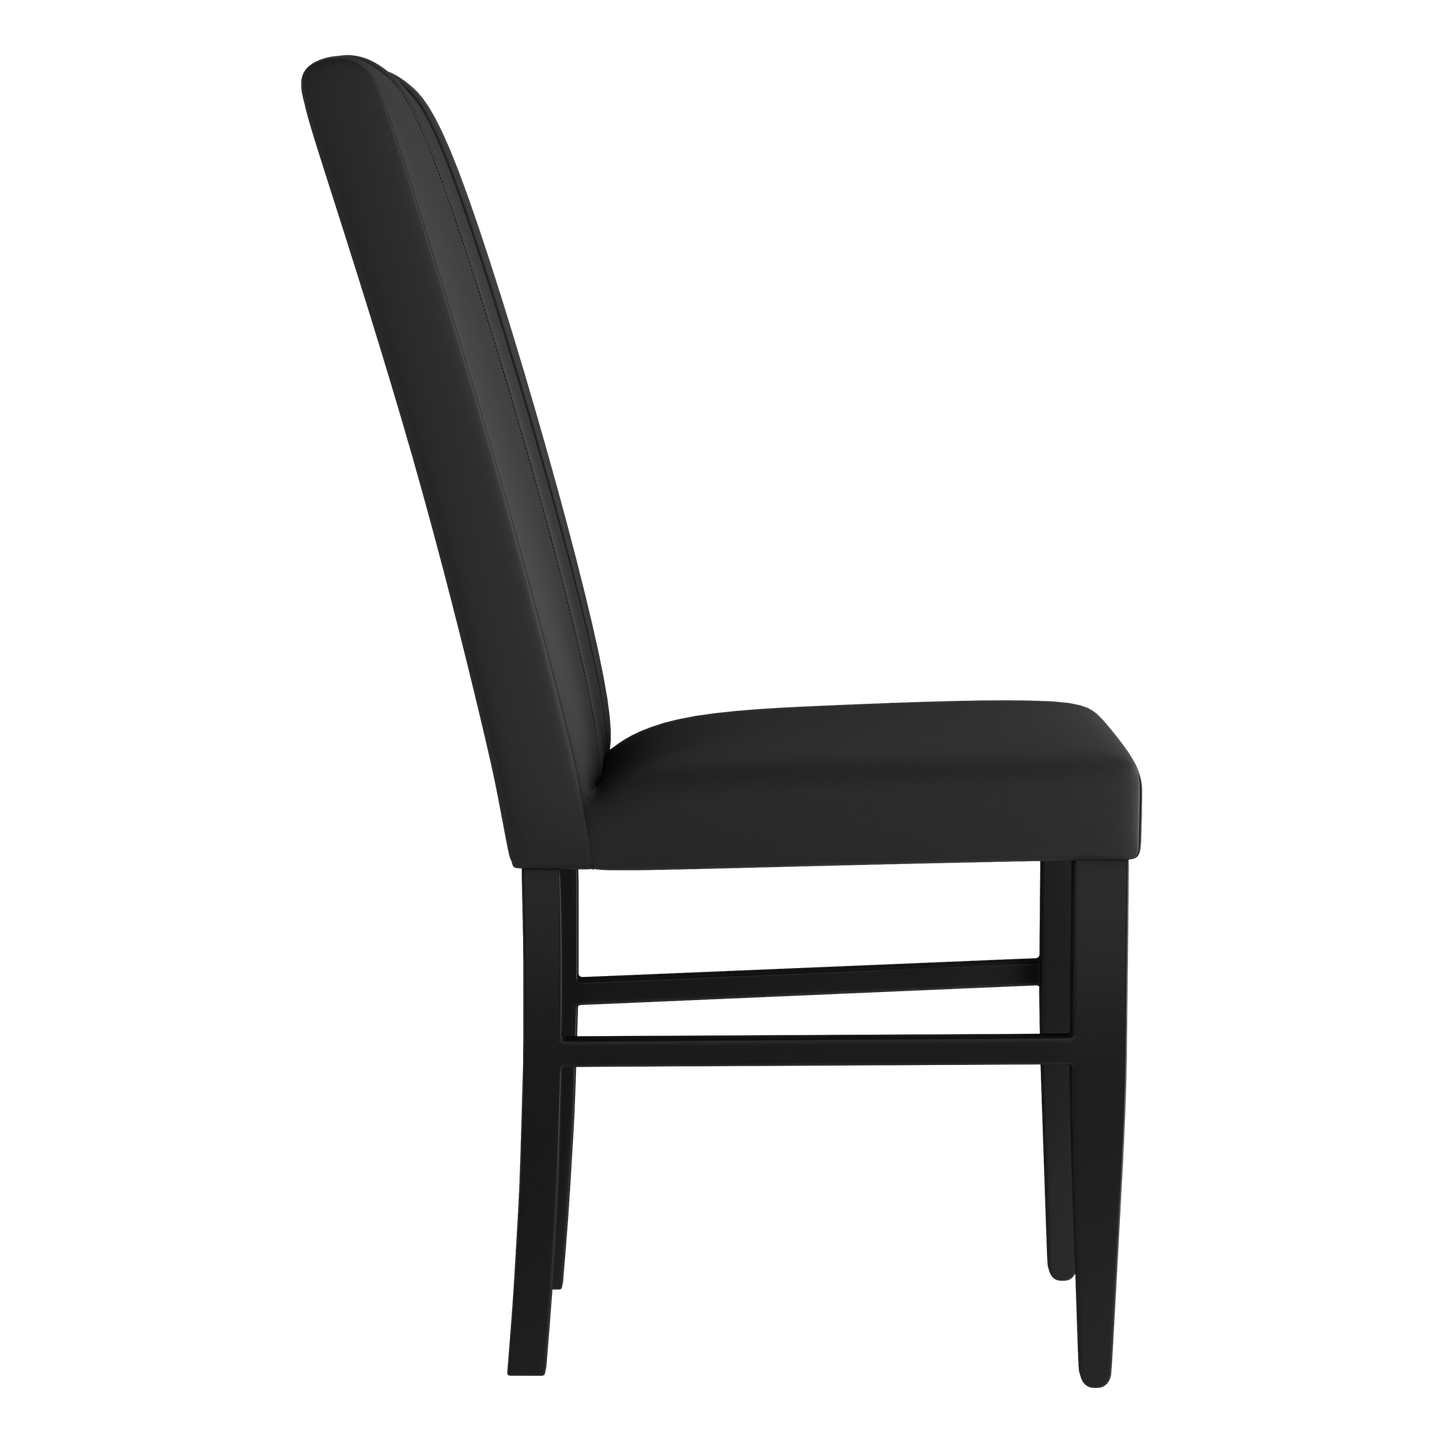 Side Chair 2000 with Vanderbilt Commodores Secondary Set of 2